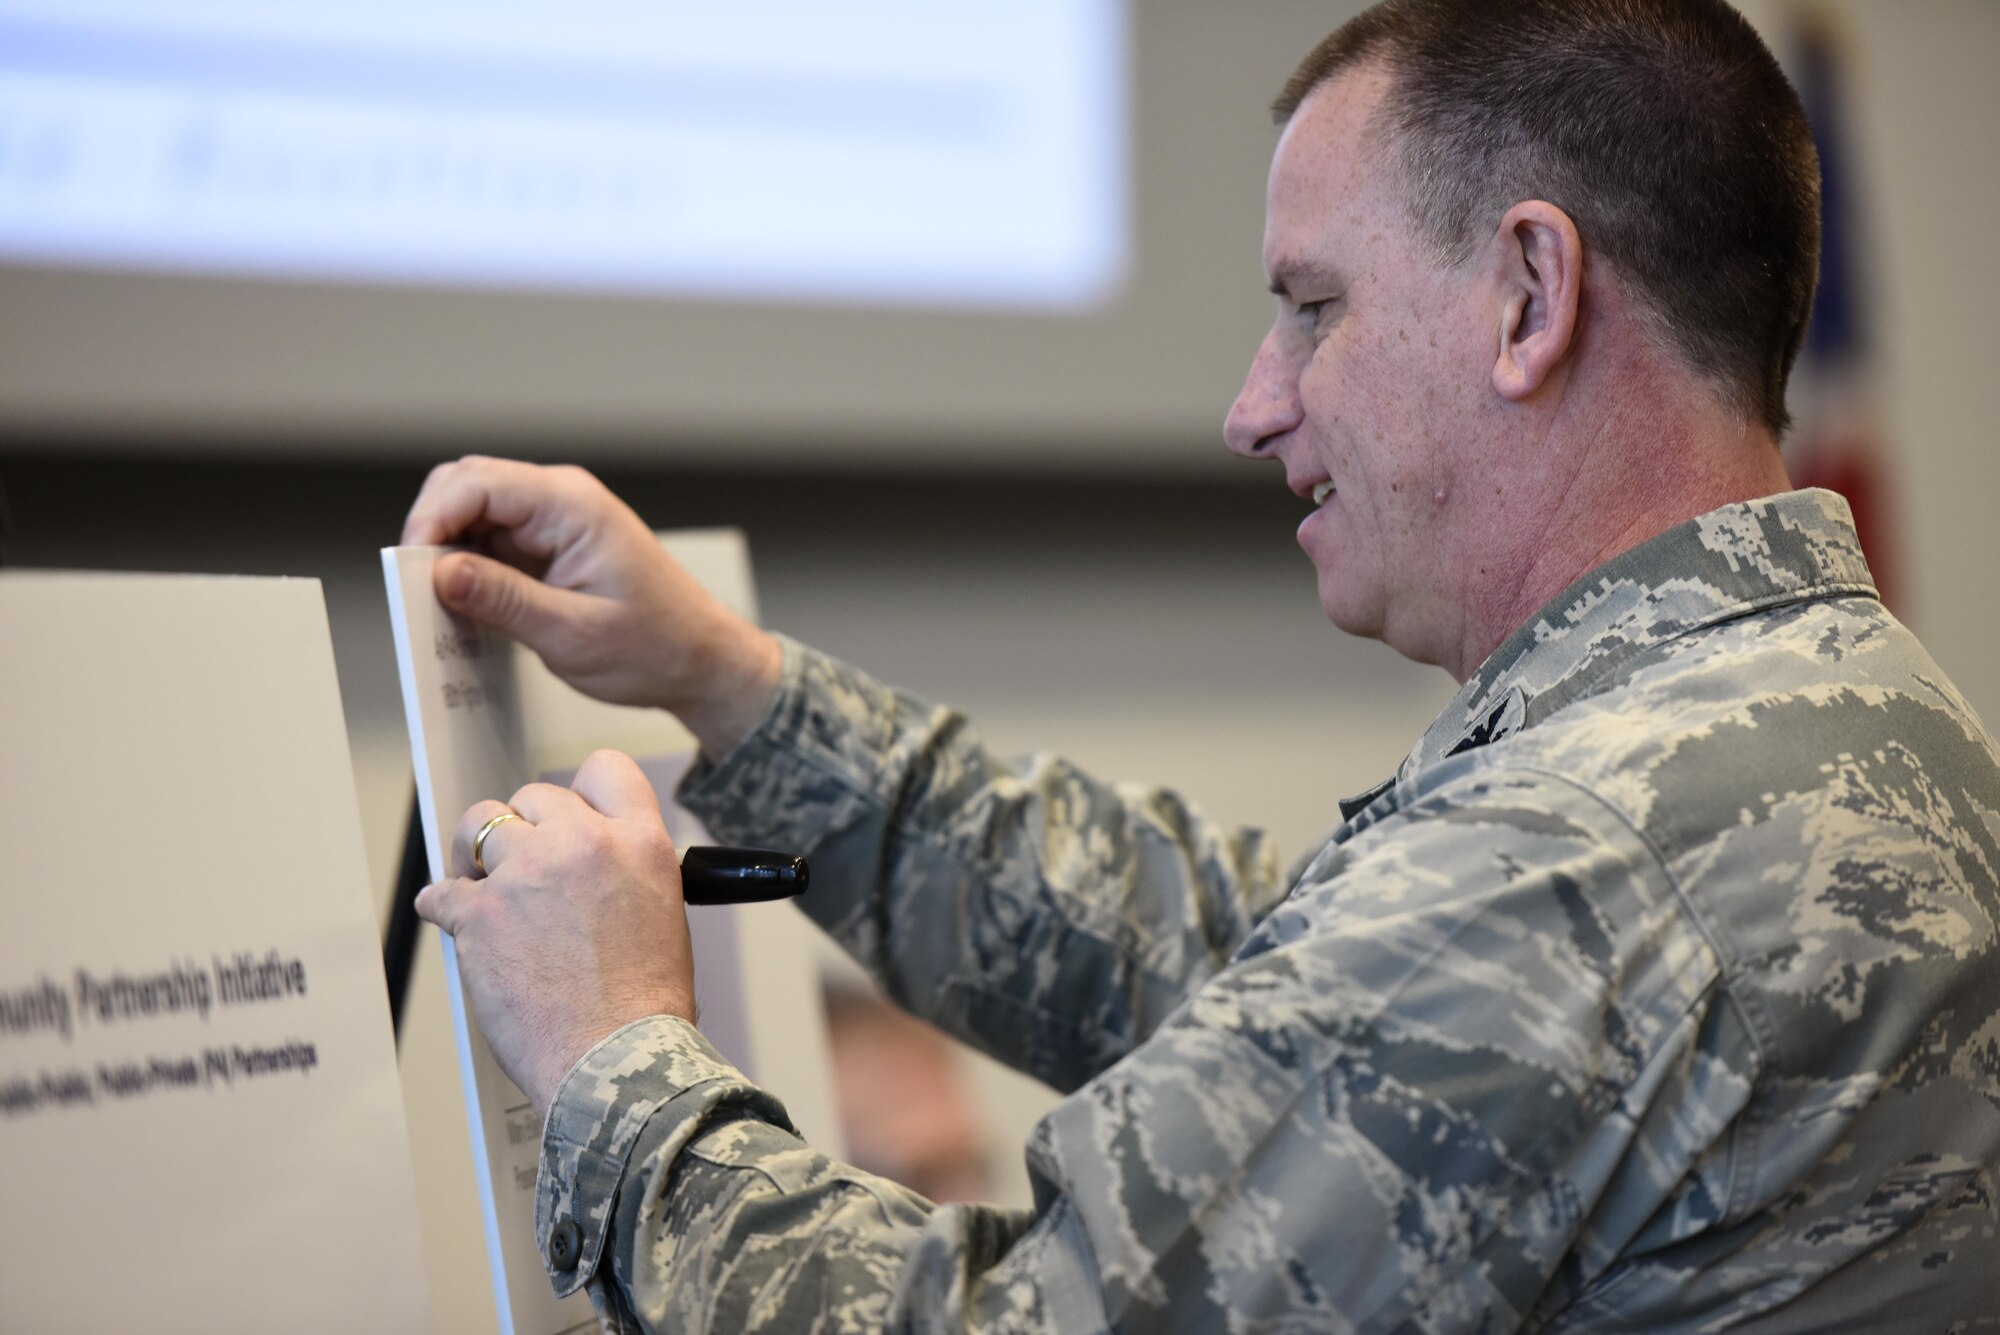 U.S. Air Force Col. Scott Reed, vice wing commander of the 180th Fighter Wing, Ohio Air National Guard, signs the Higher Degree Attainment Initiative March 22, 2017 at the 180FW in Swanton, Ohio. The agreement between the 180FW and five local-area universities provides additional education opportunities for 180FW Airmen while providing participating colleges with recruitment opportunities.  (U.S. Air National Guard photo by Staff Sgt. Shane Hughes)